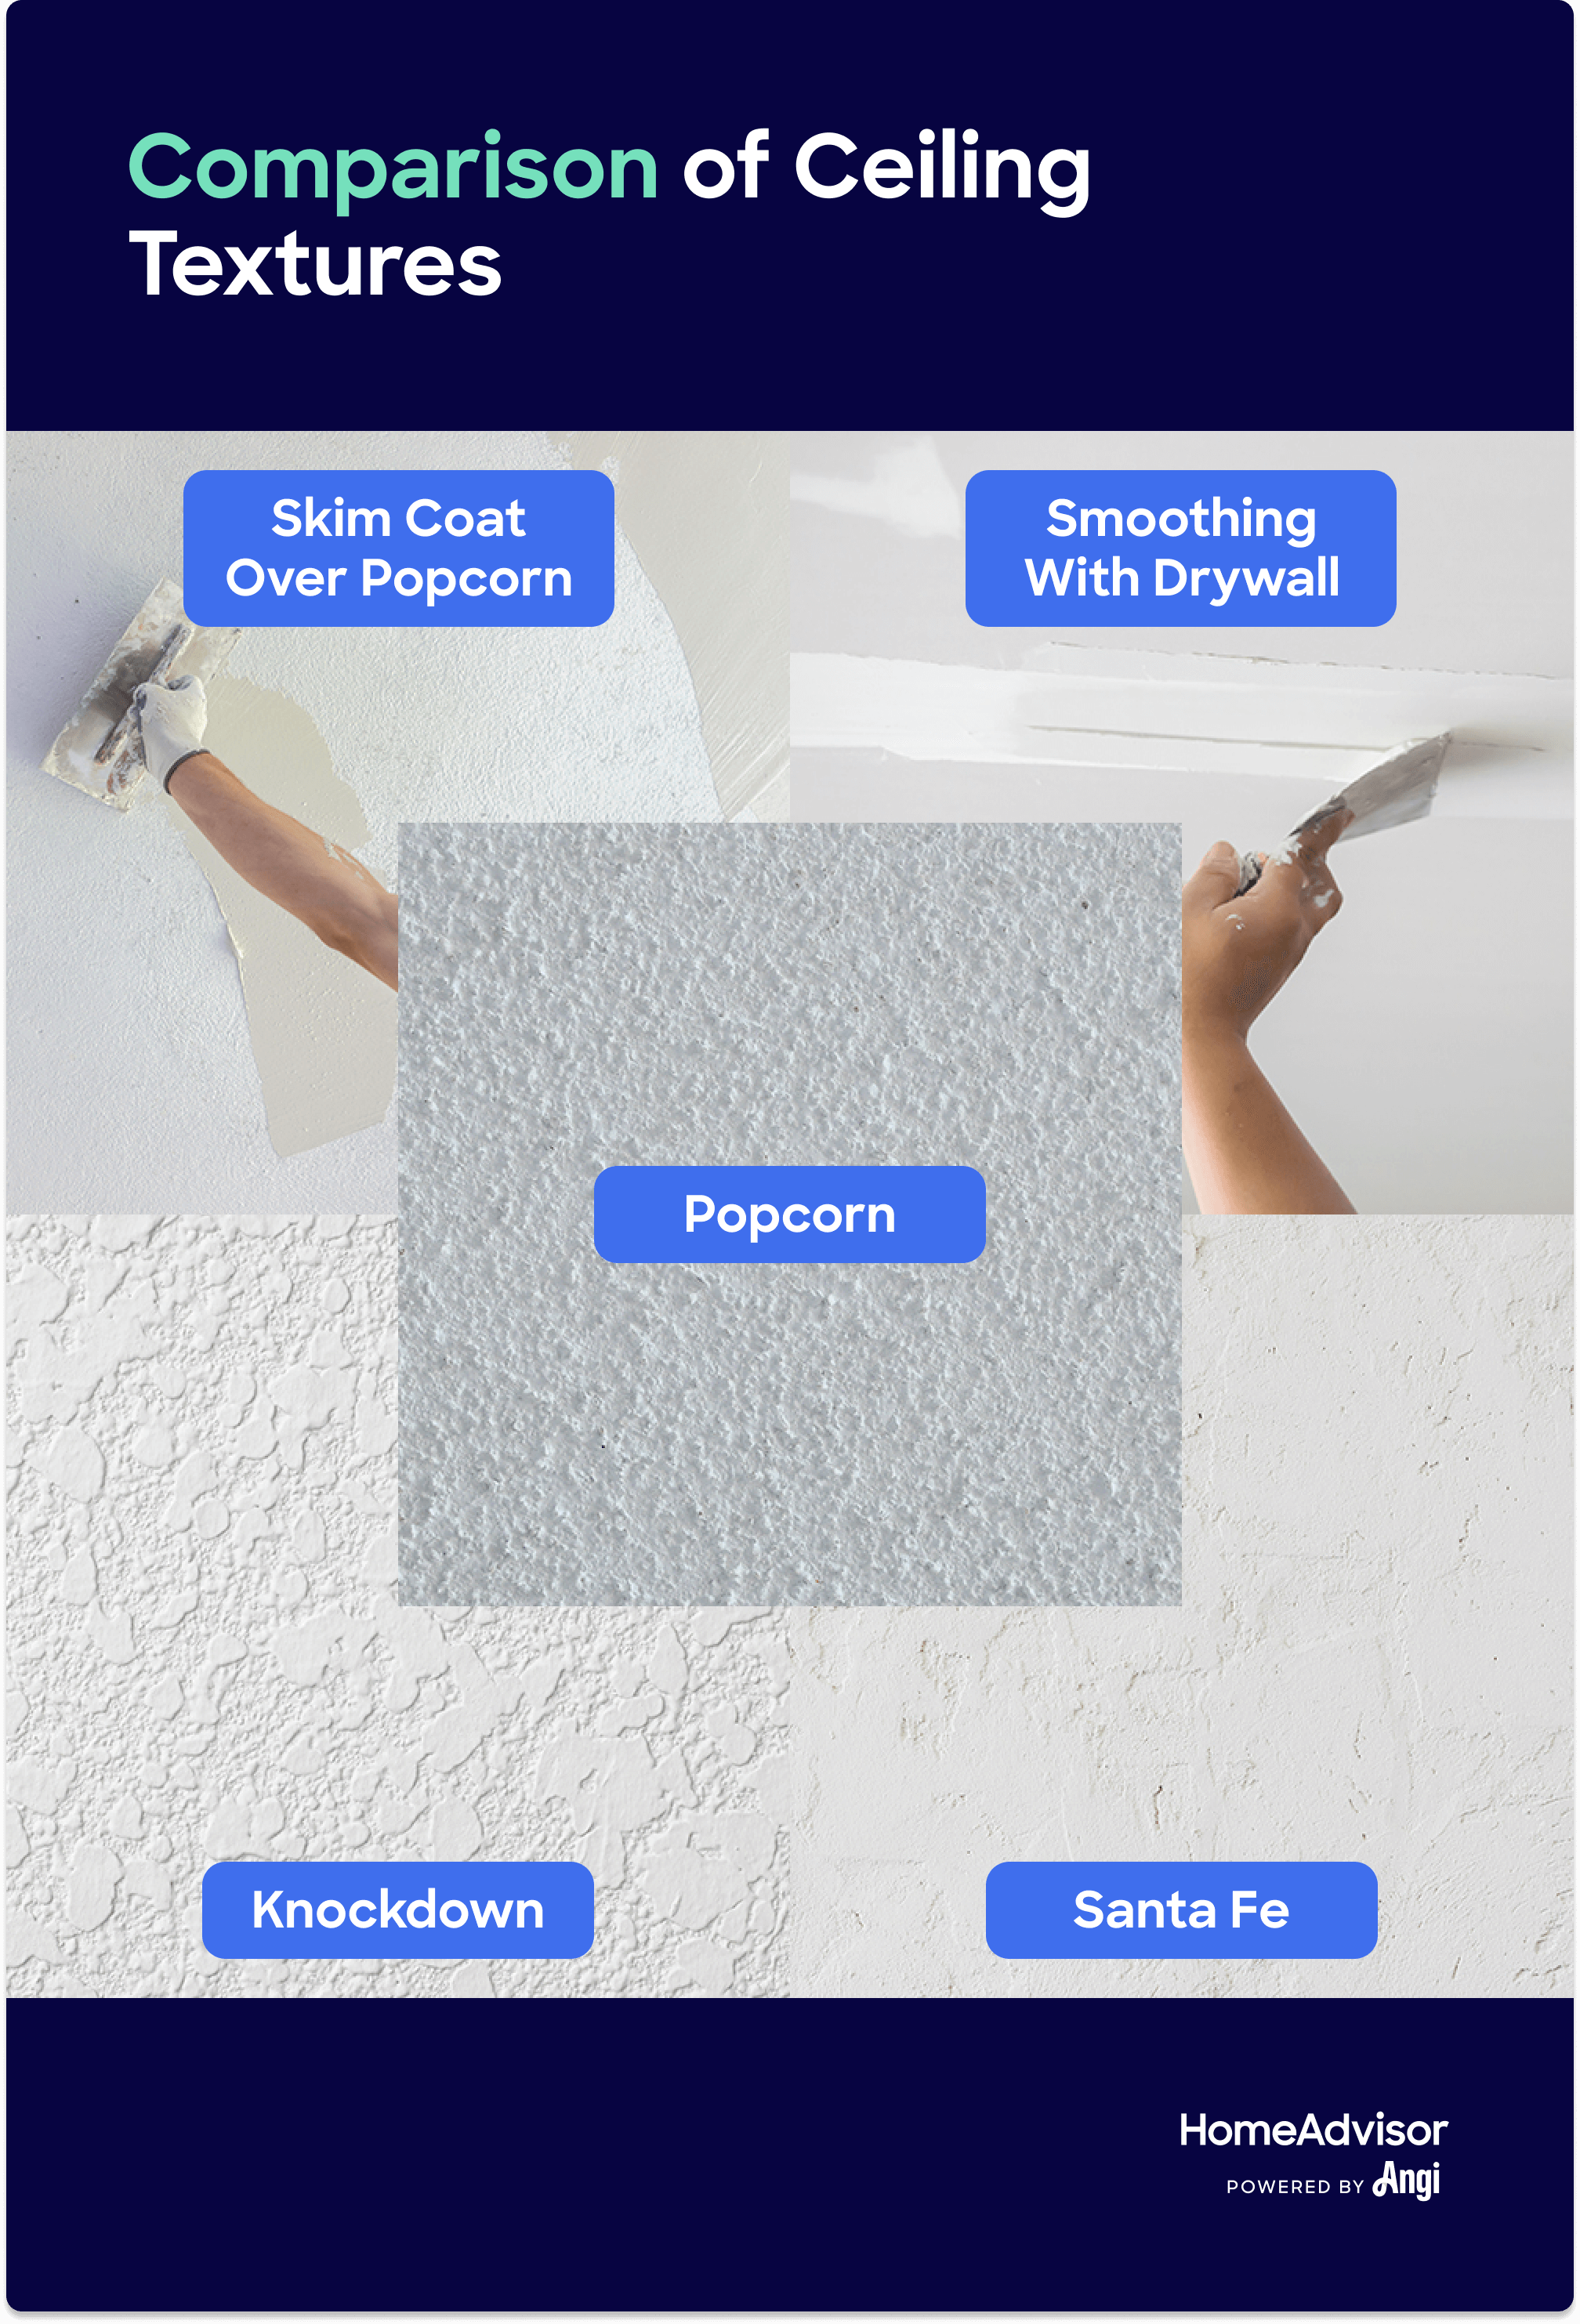 What Does Popcorn Ceiling Removal Cost